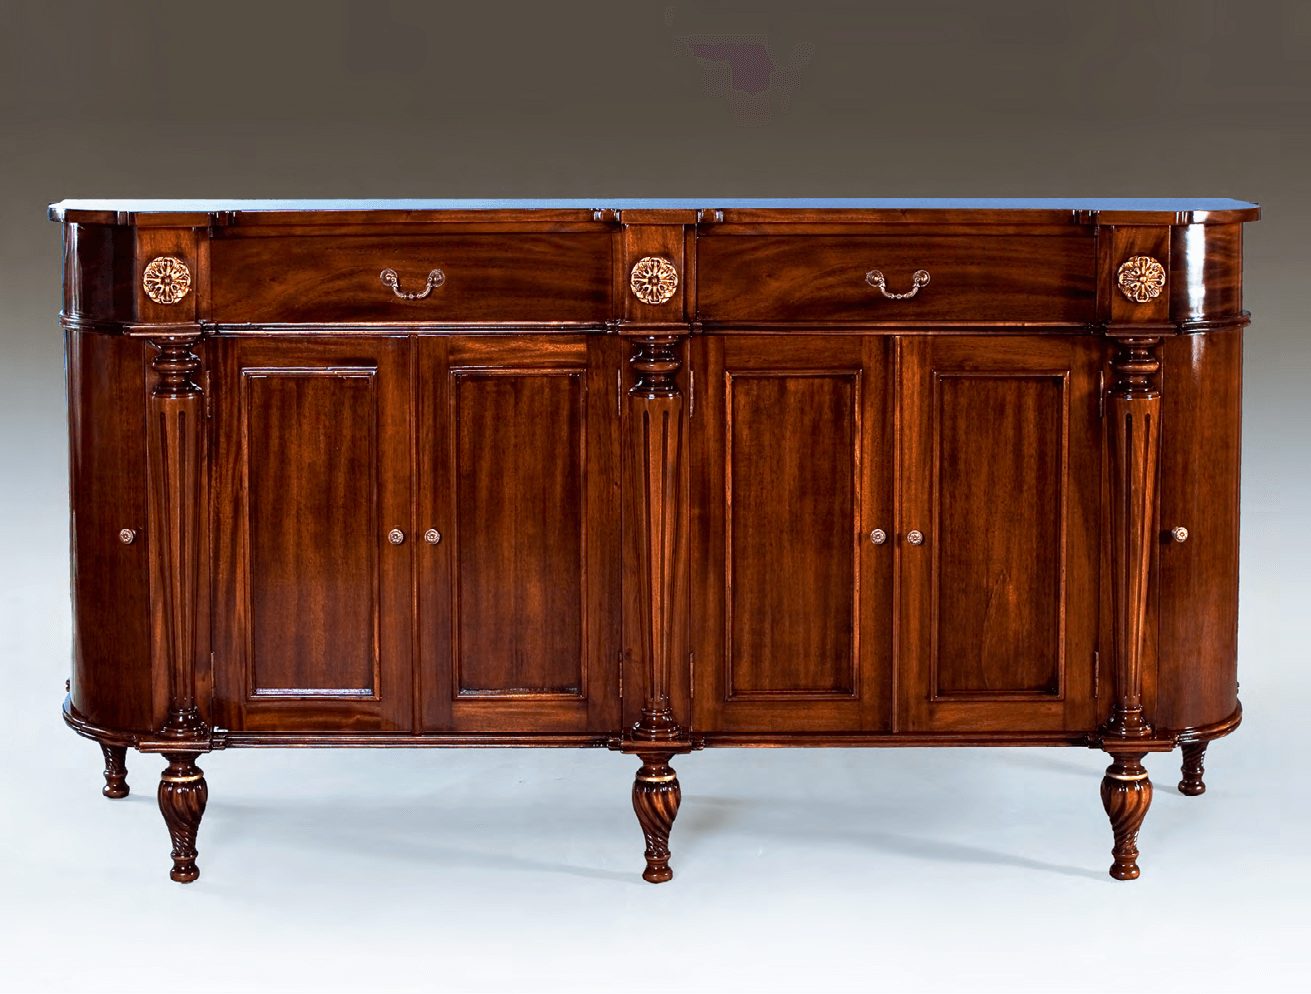 EMPIRE STYLE SIDEBOARD - House of Chippendale